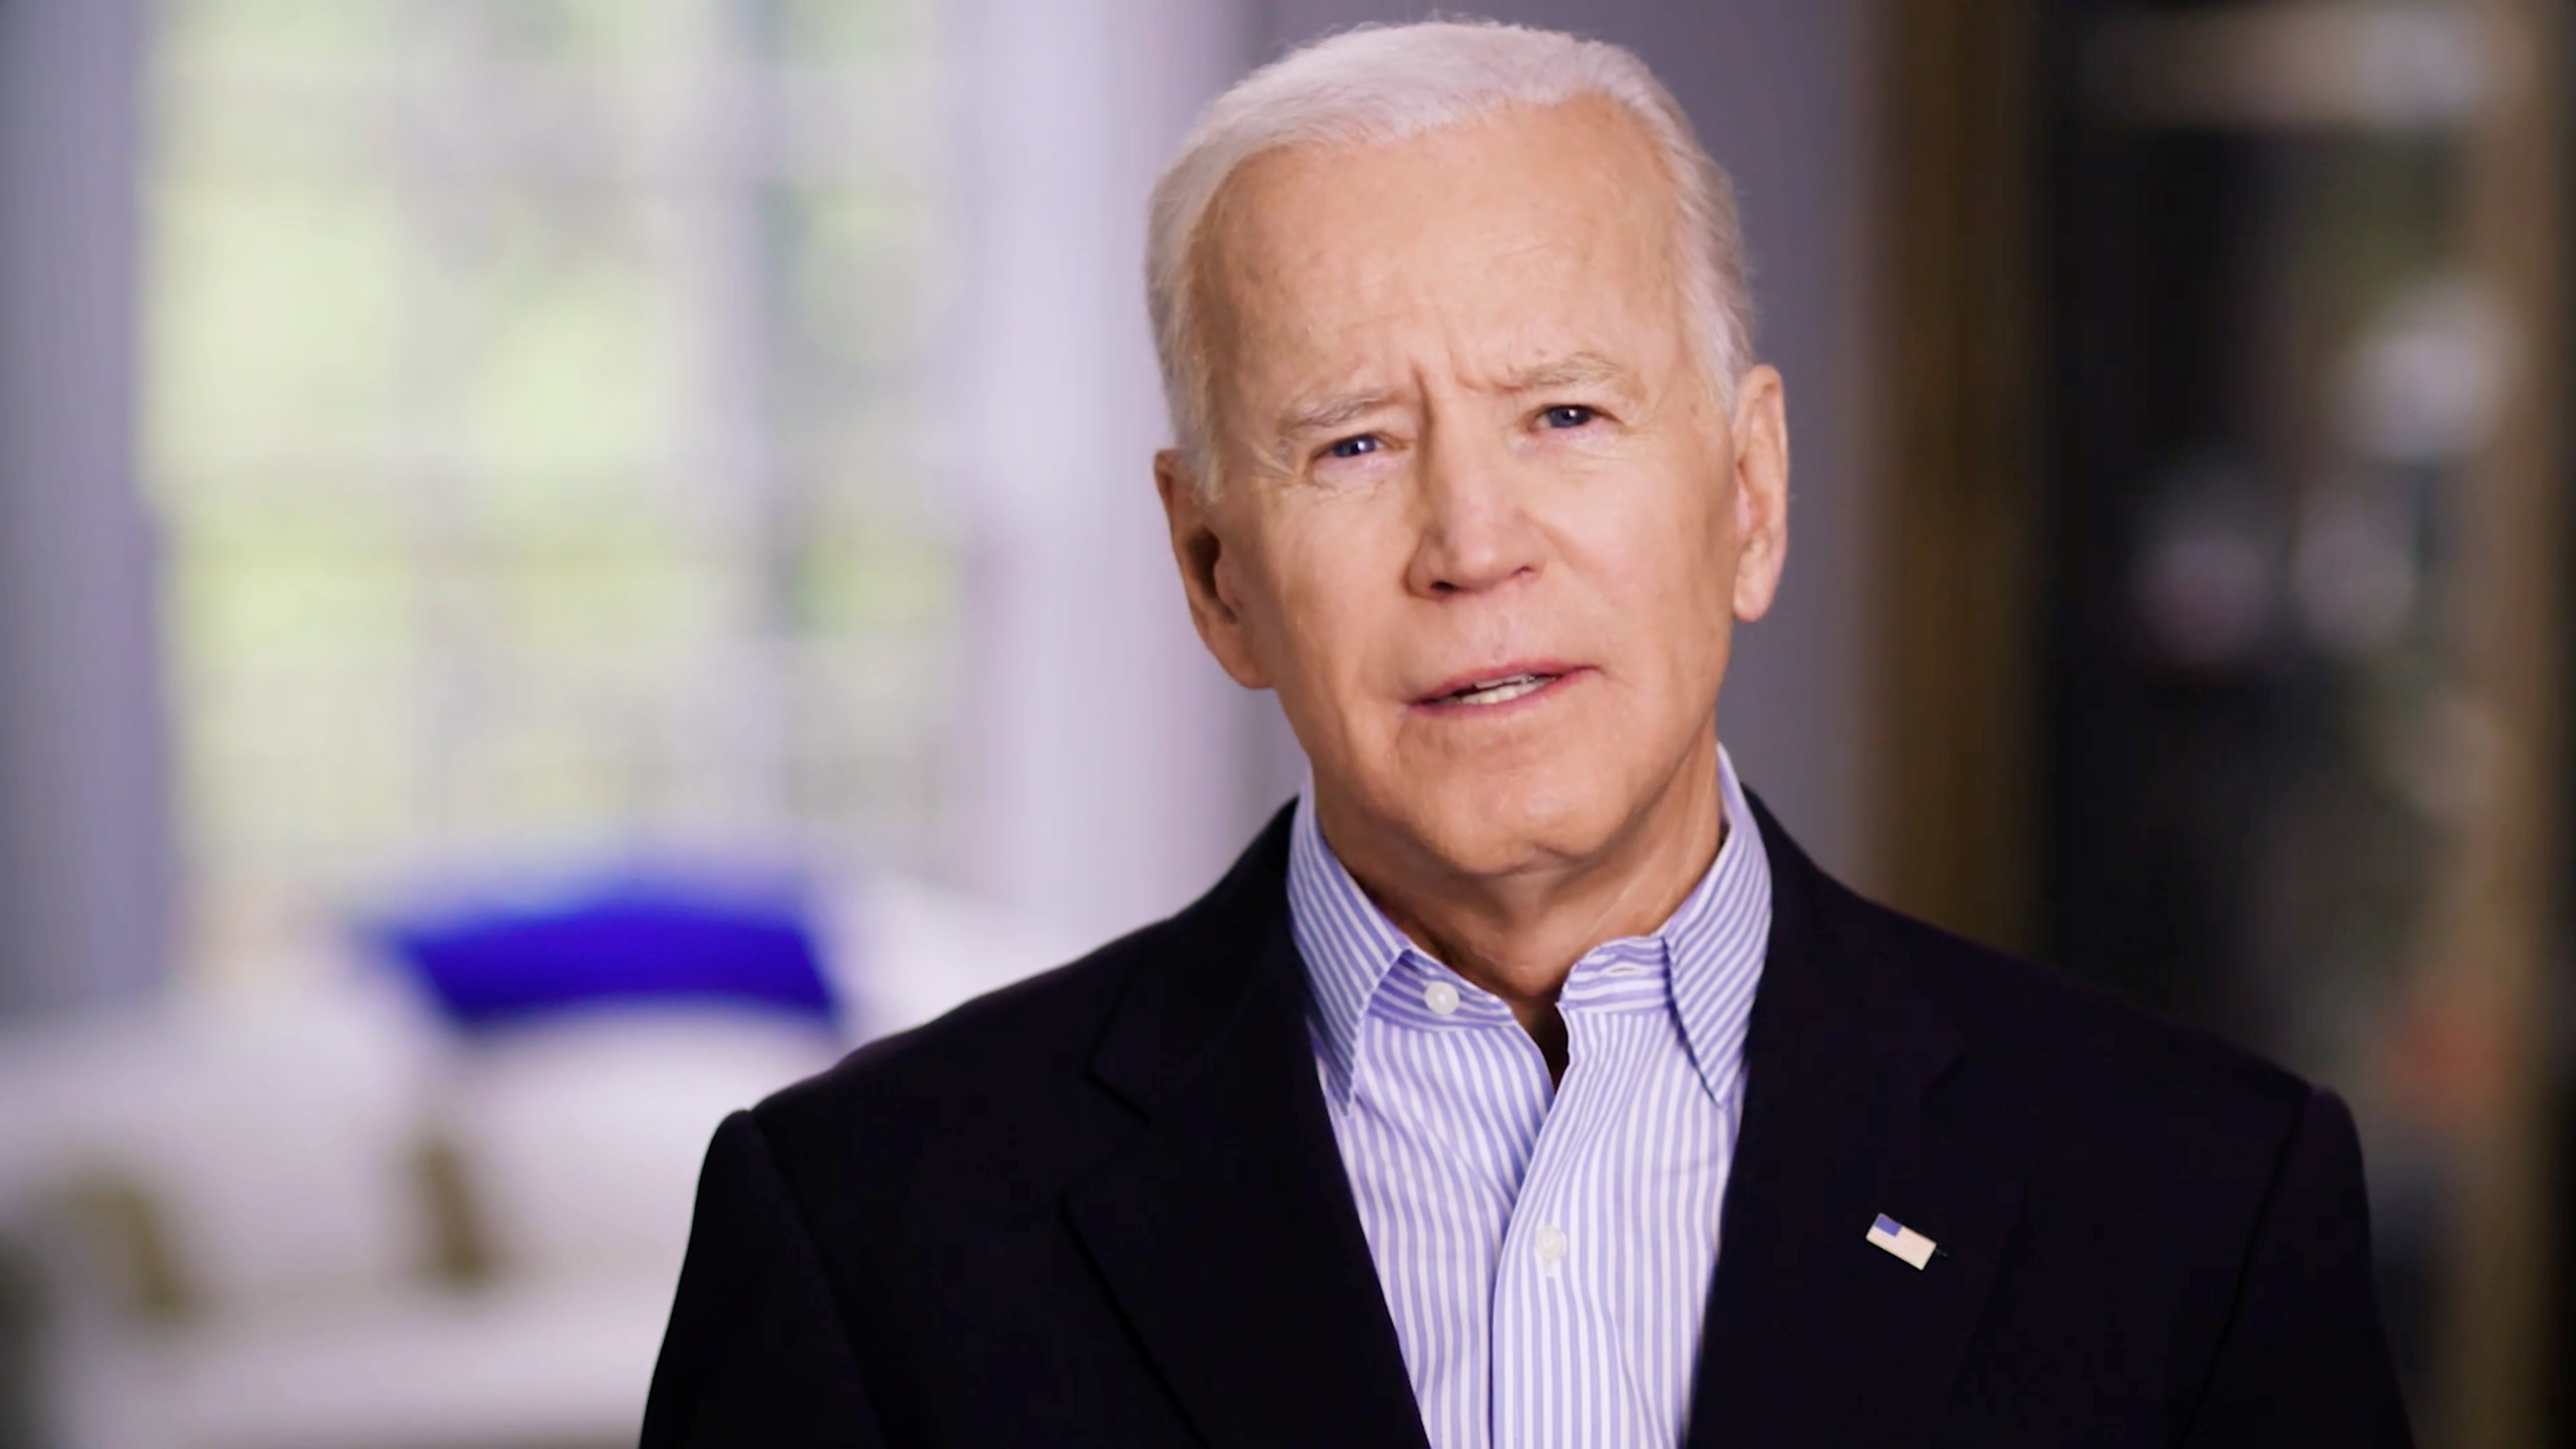 Former U.S. Vice President Joe Biden announces his candidacy for the Democratic presidential nomination in this still image taken from a video released April 25, 2019. BIDEN CAMPAIGN HANDOUT via REUTERS